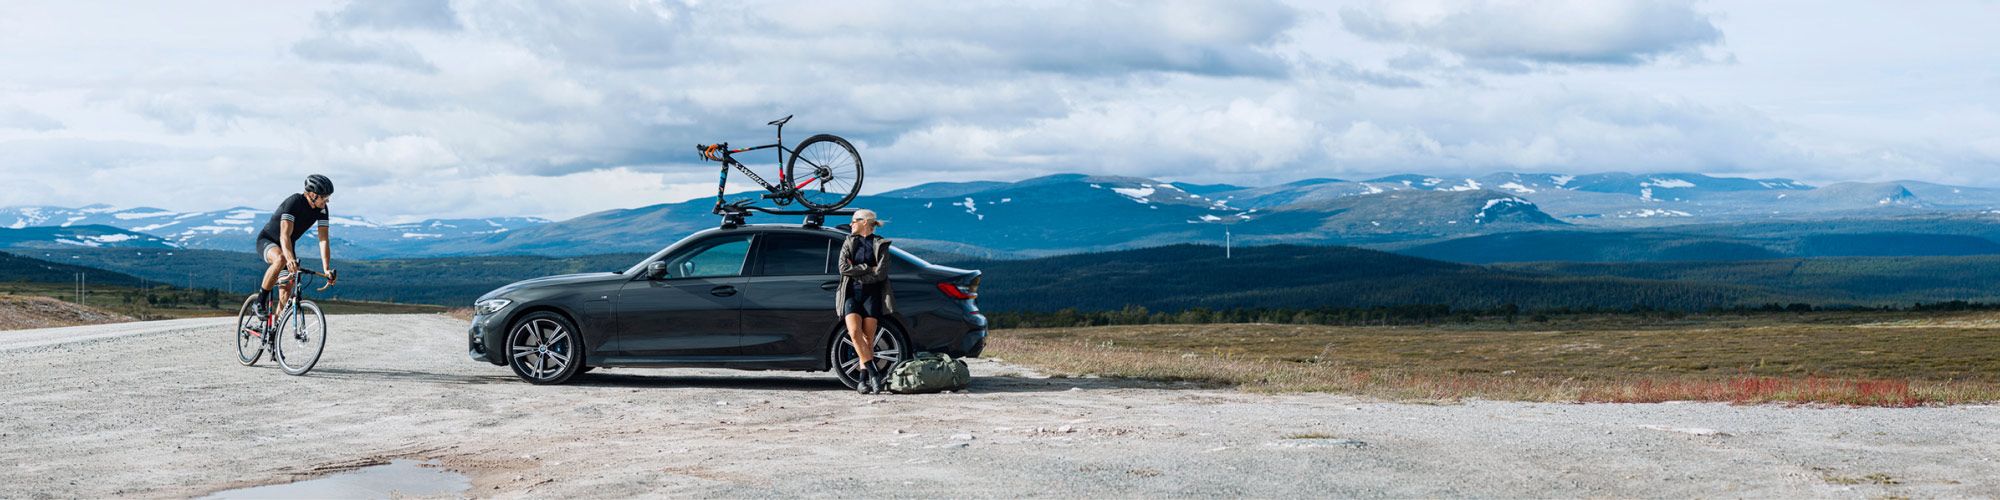 On a mountainous country road two cyclists have brought their bikes on a Thule roof bike rack.